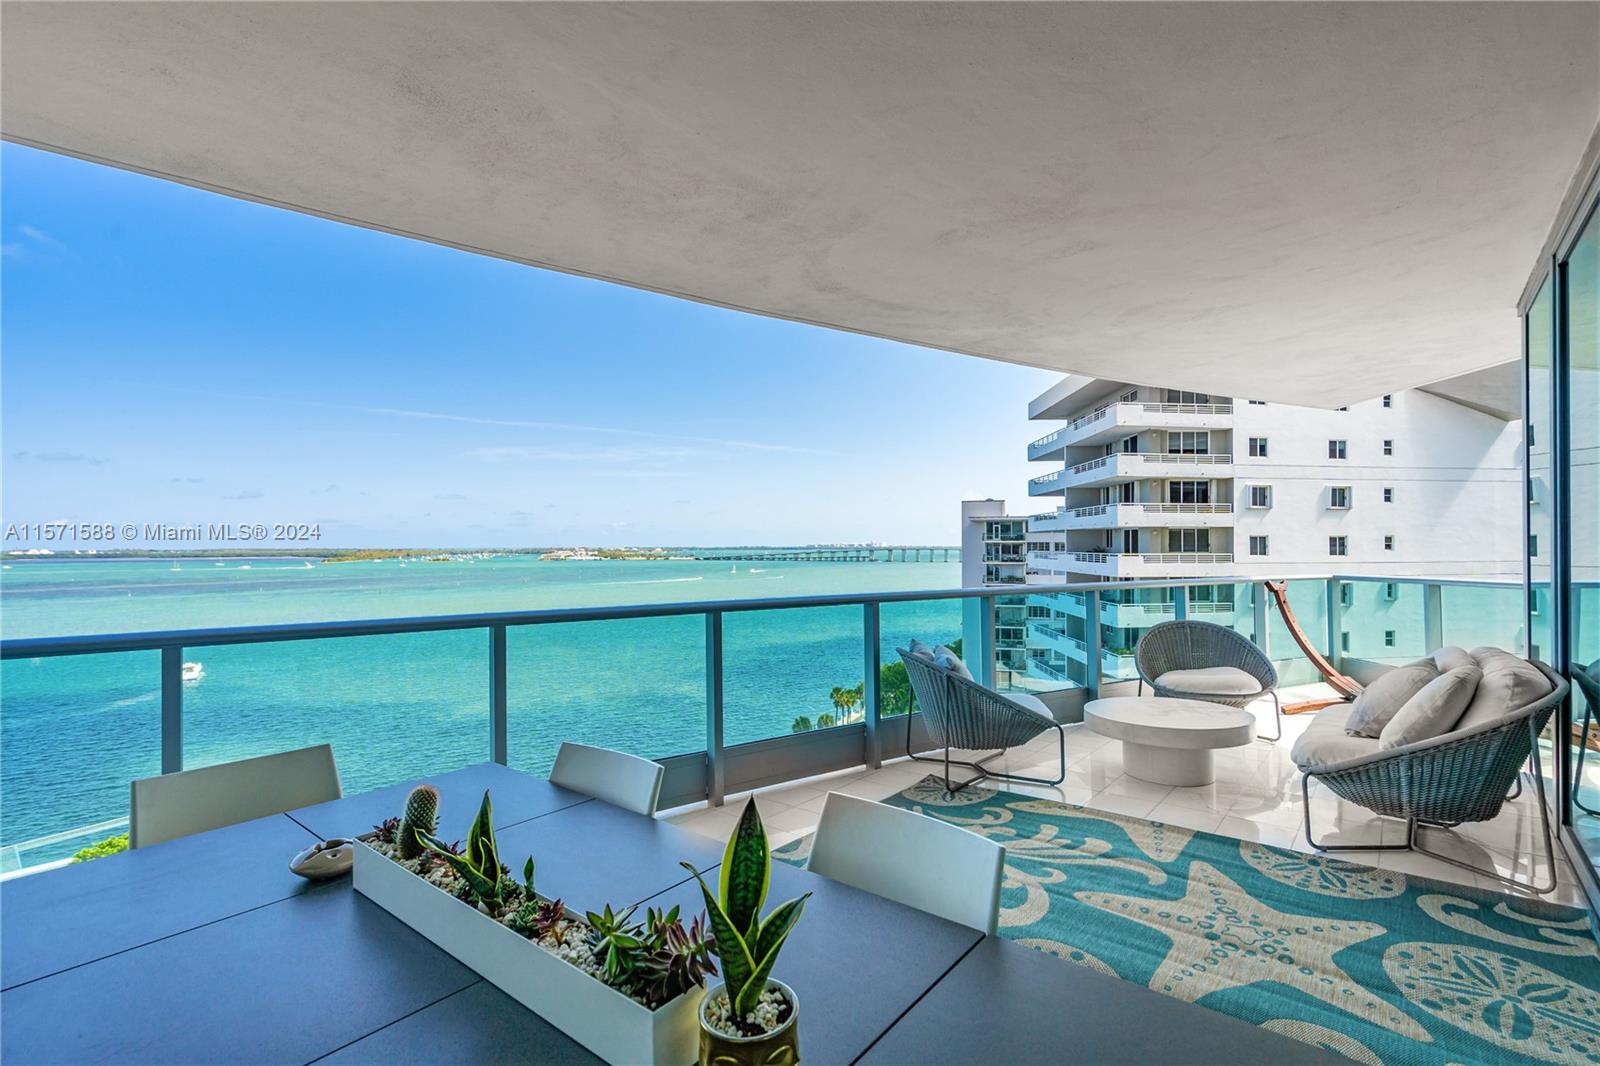 Experience luxury waterfront living in the heart of Brickell with this sophisticated resort-style un